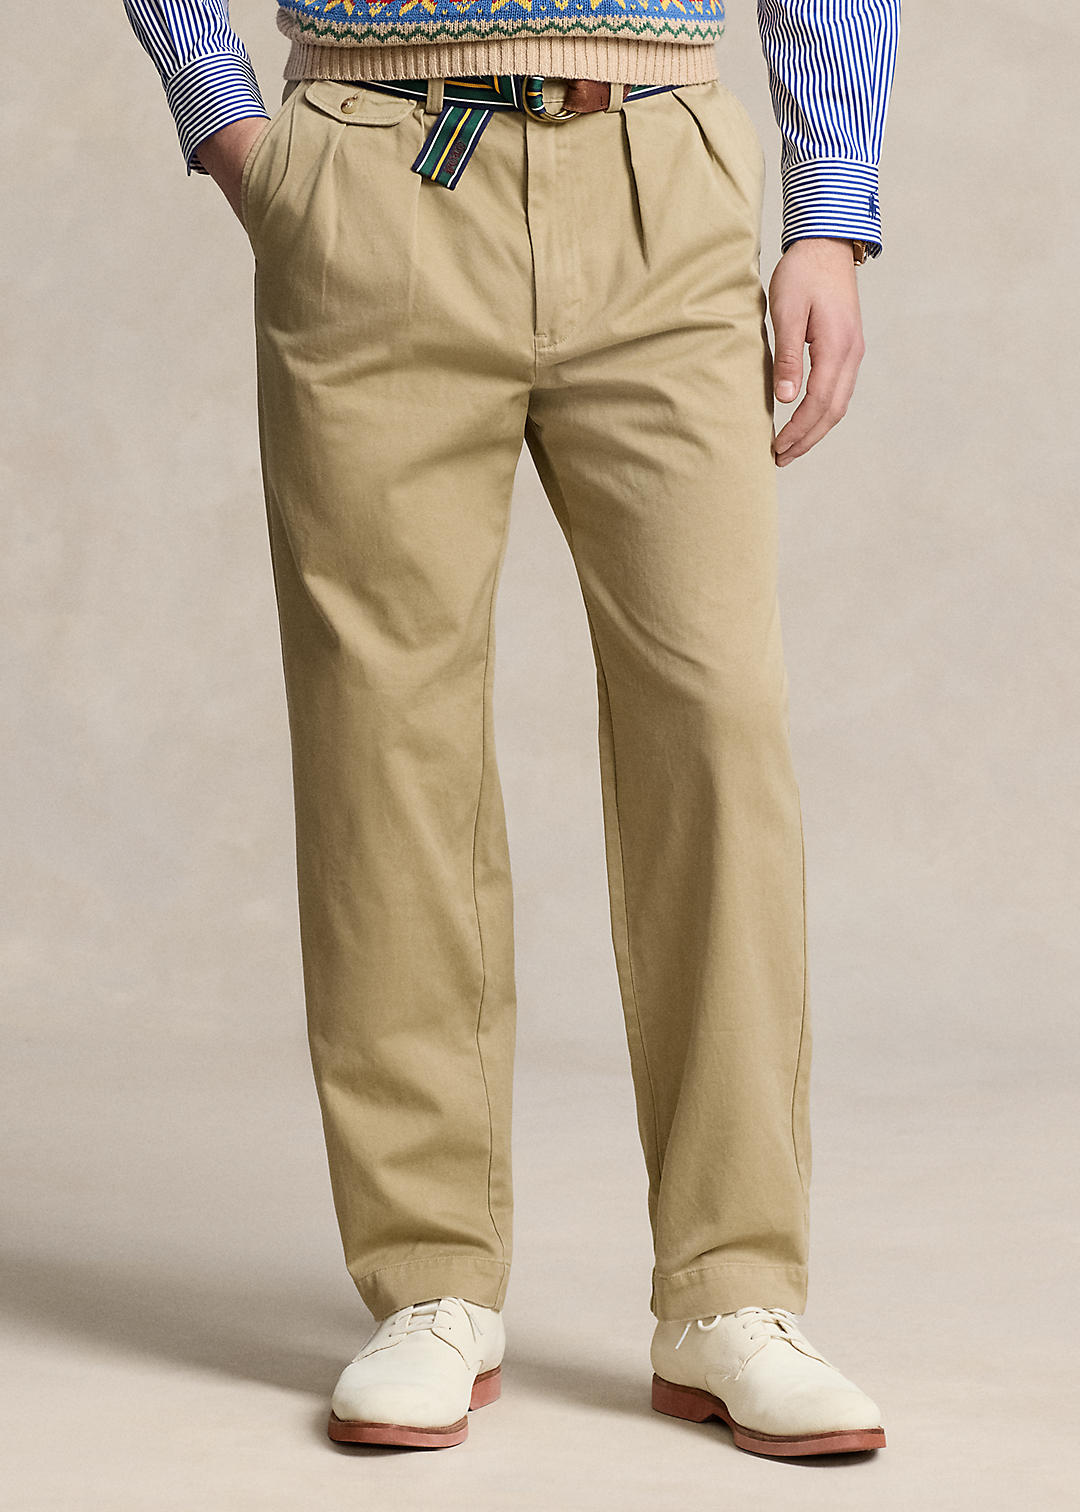 Polo Ralph Lauren Whitman Relaxed Fit Pleated Chino Trouser 3